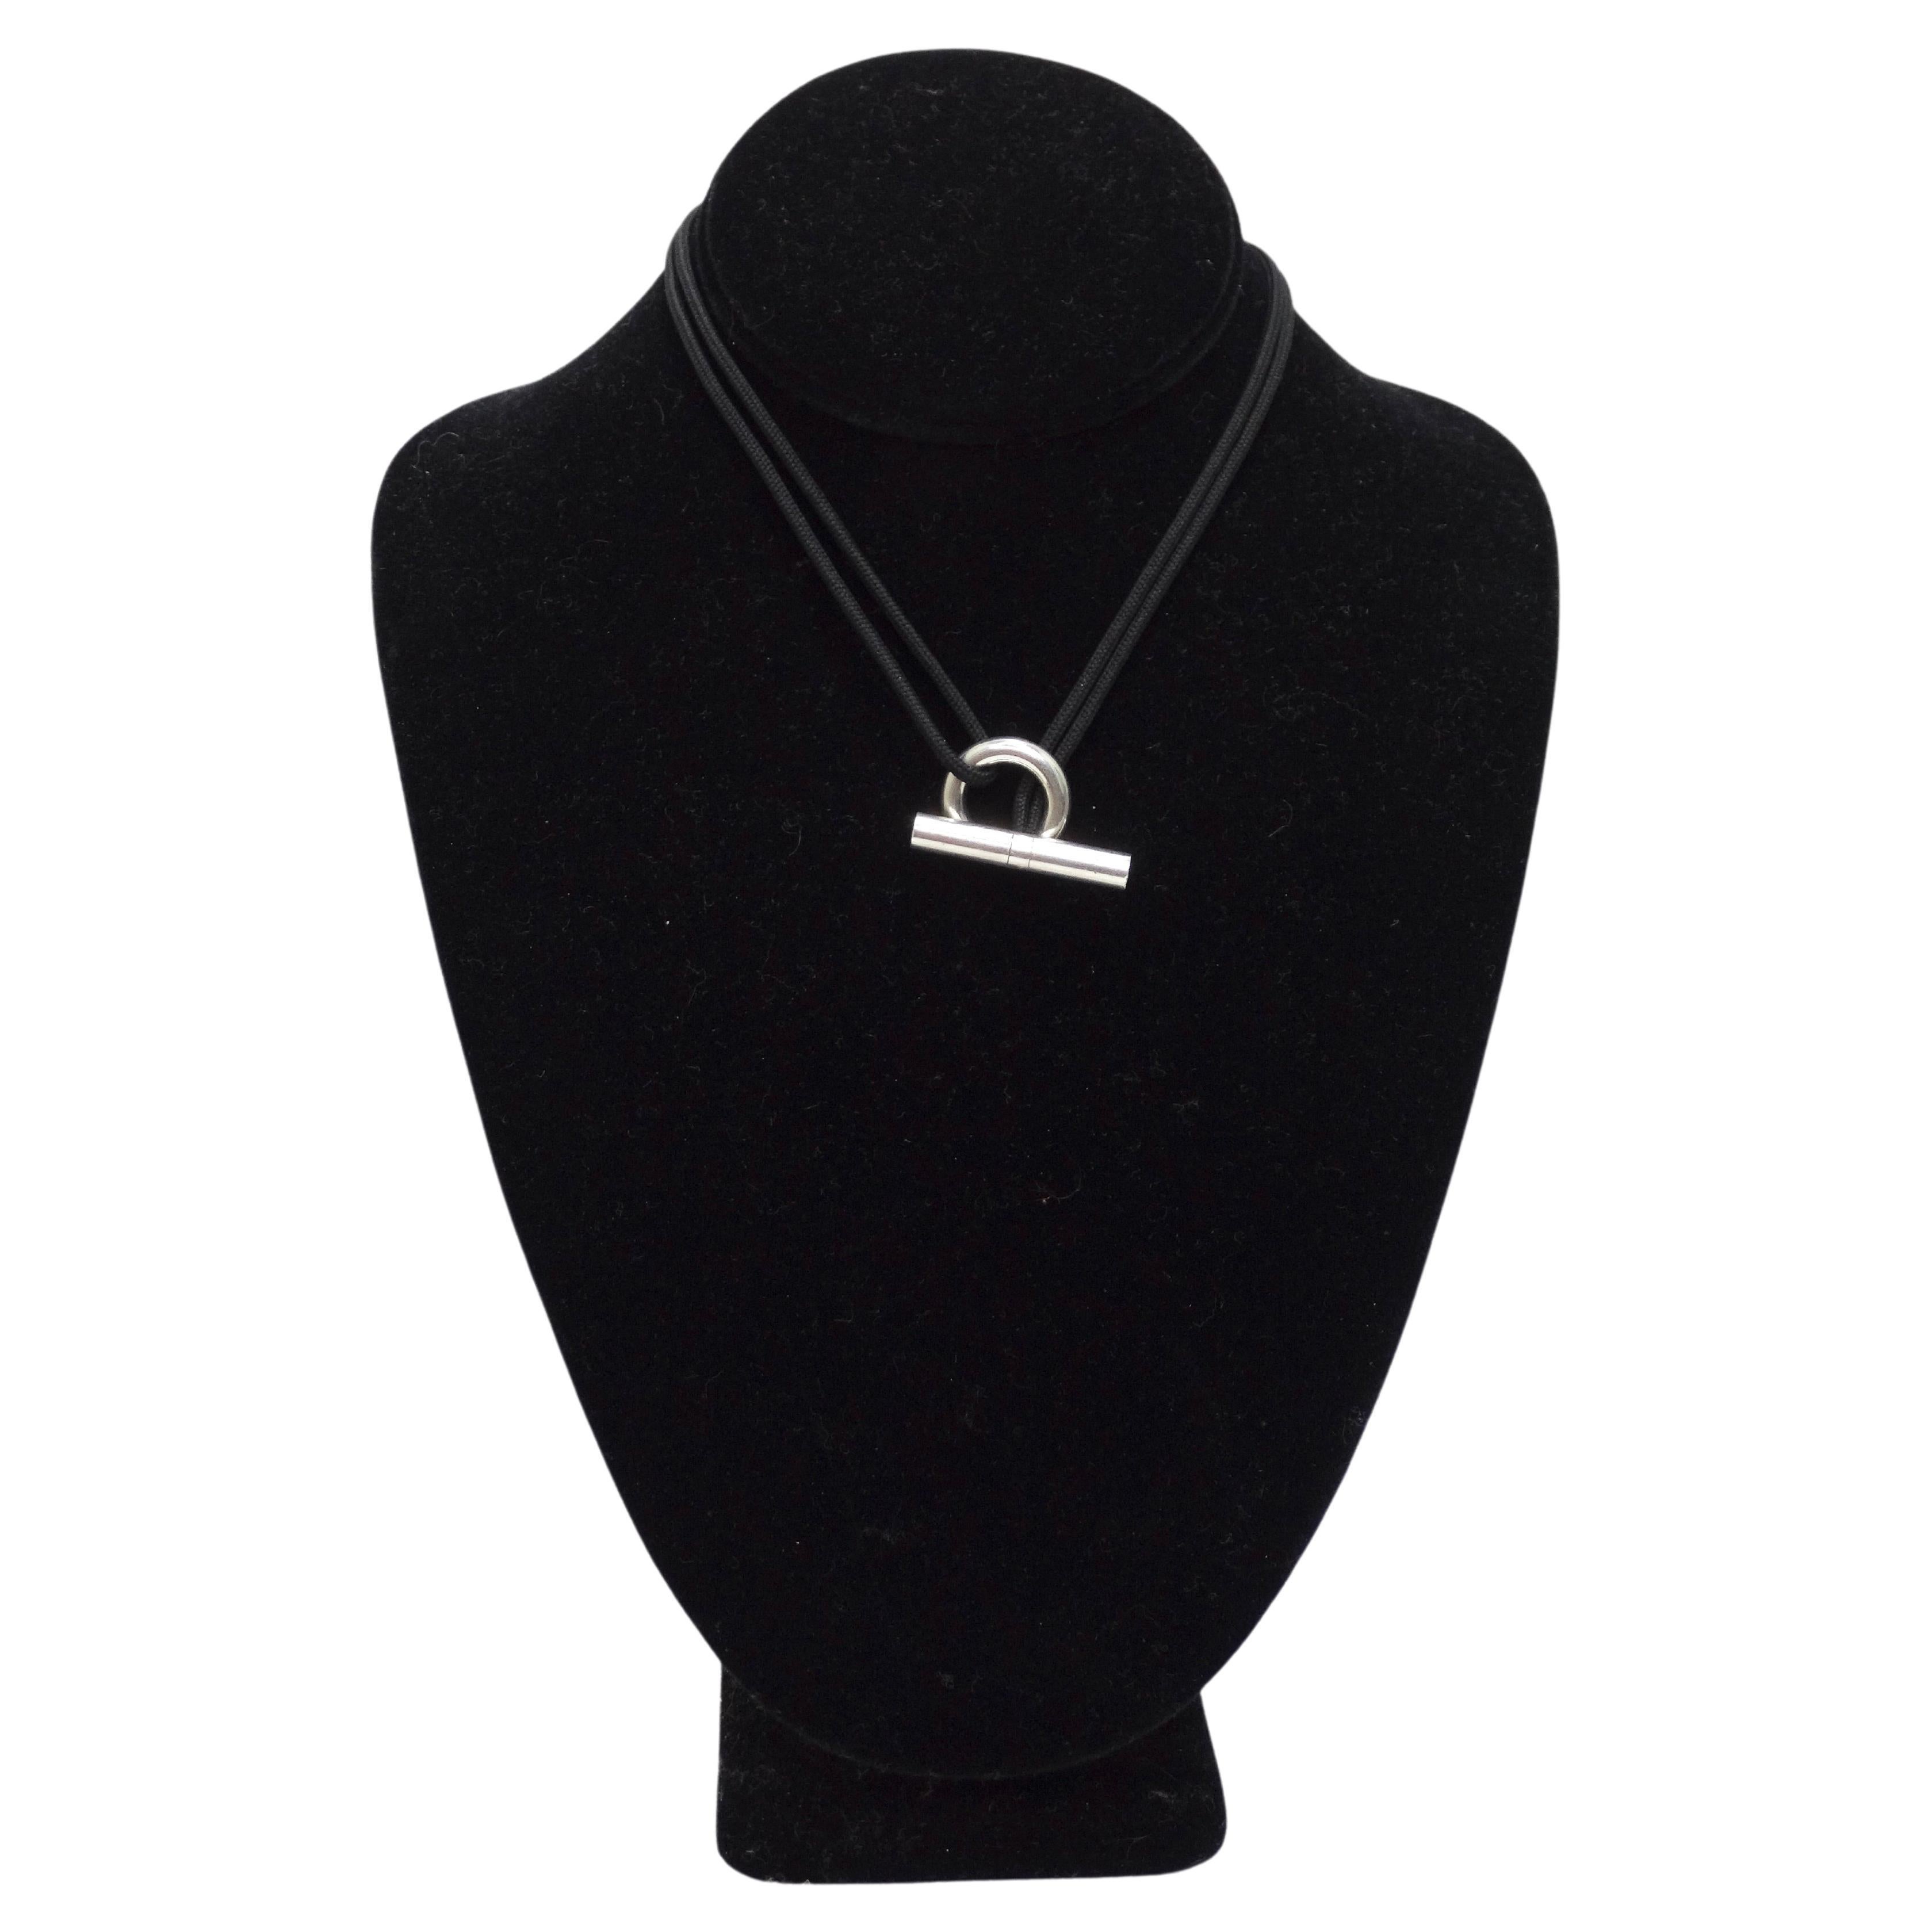 This choker necklace needs to be your next accessory, and it doesn't hurt that it is the wonderful Hermès! This is a vintage Hermès Skipper necklace that is featured in a black robe cord and silver tone hardware. This has an iconic toggle pin